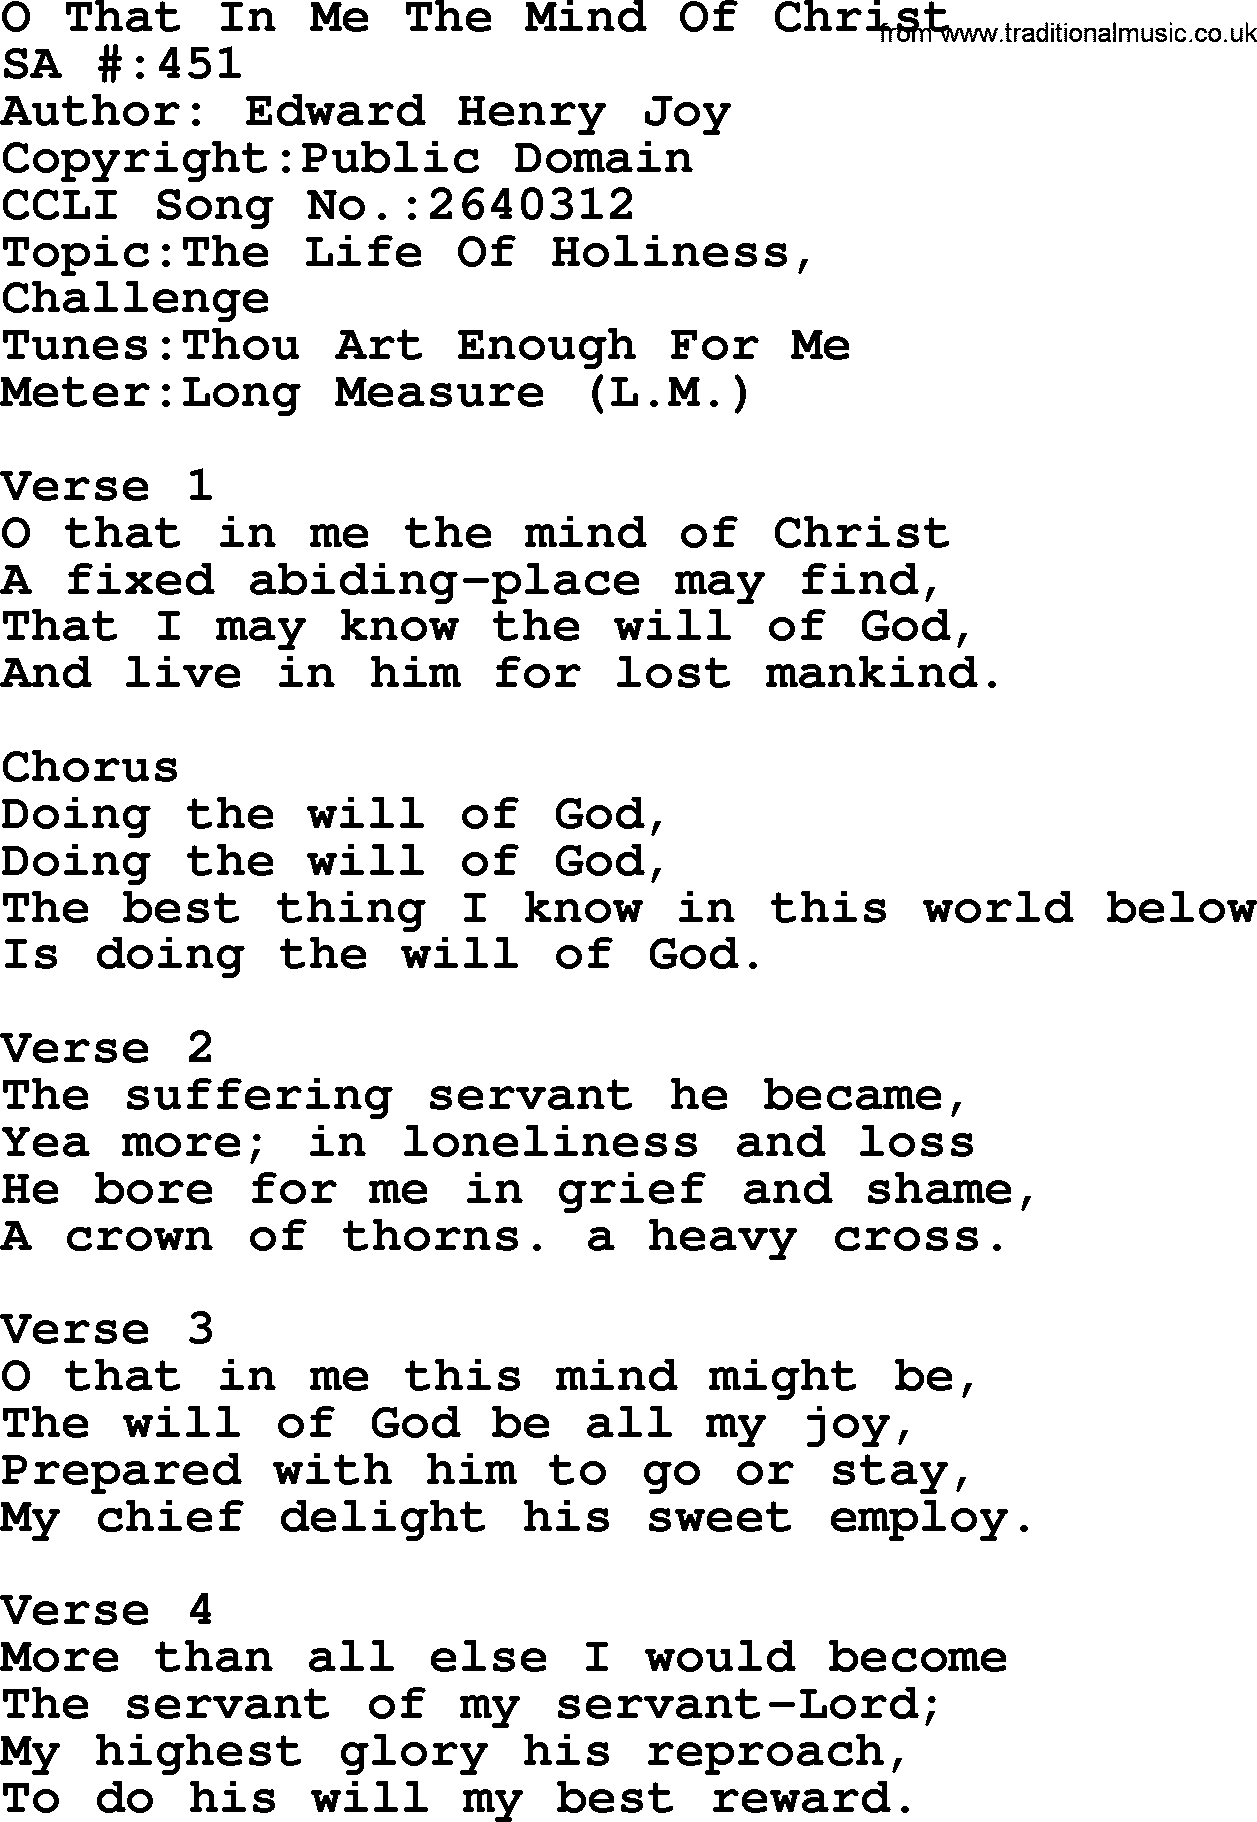 Salvation Army Hymnal, title: O That In Me The Mind Of Christ, with lyrics and PDF,